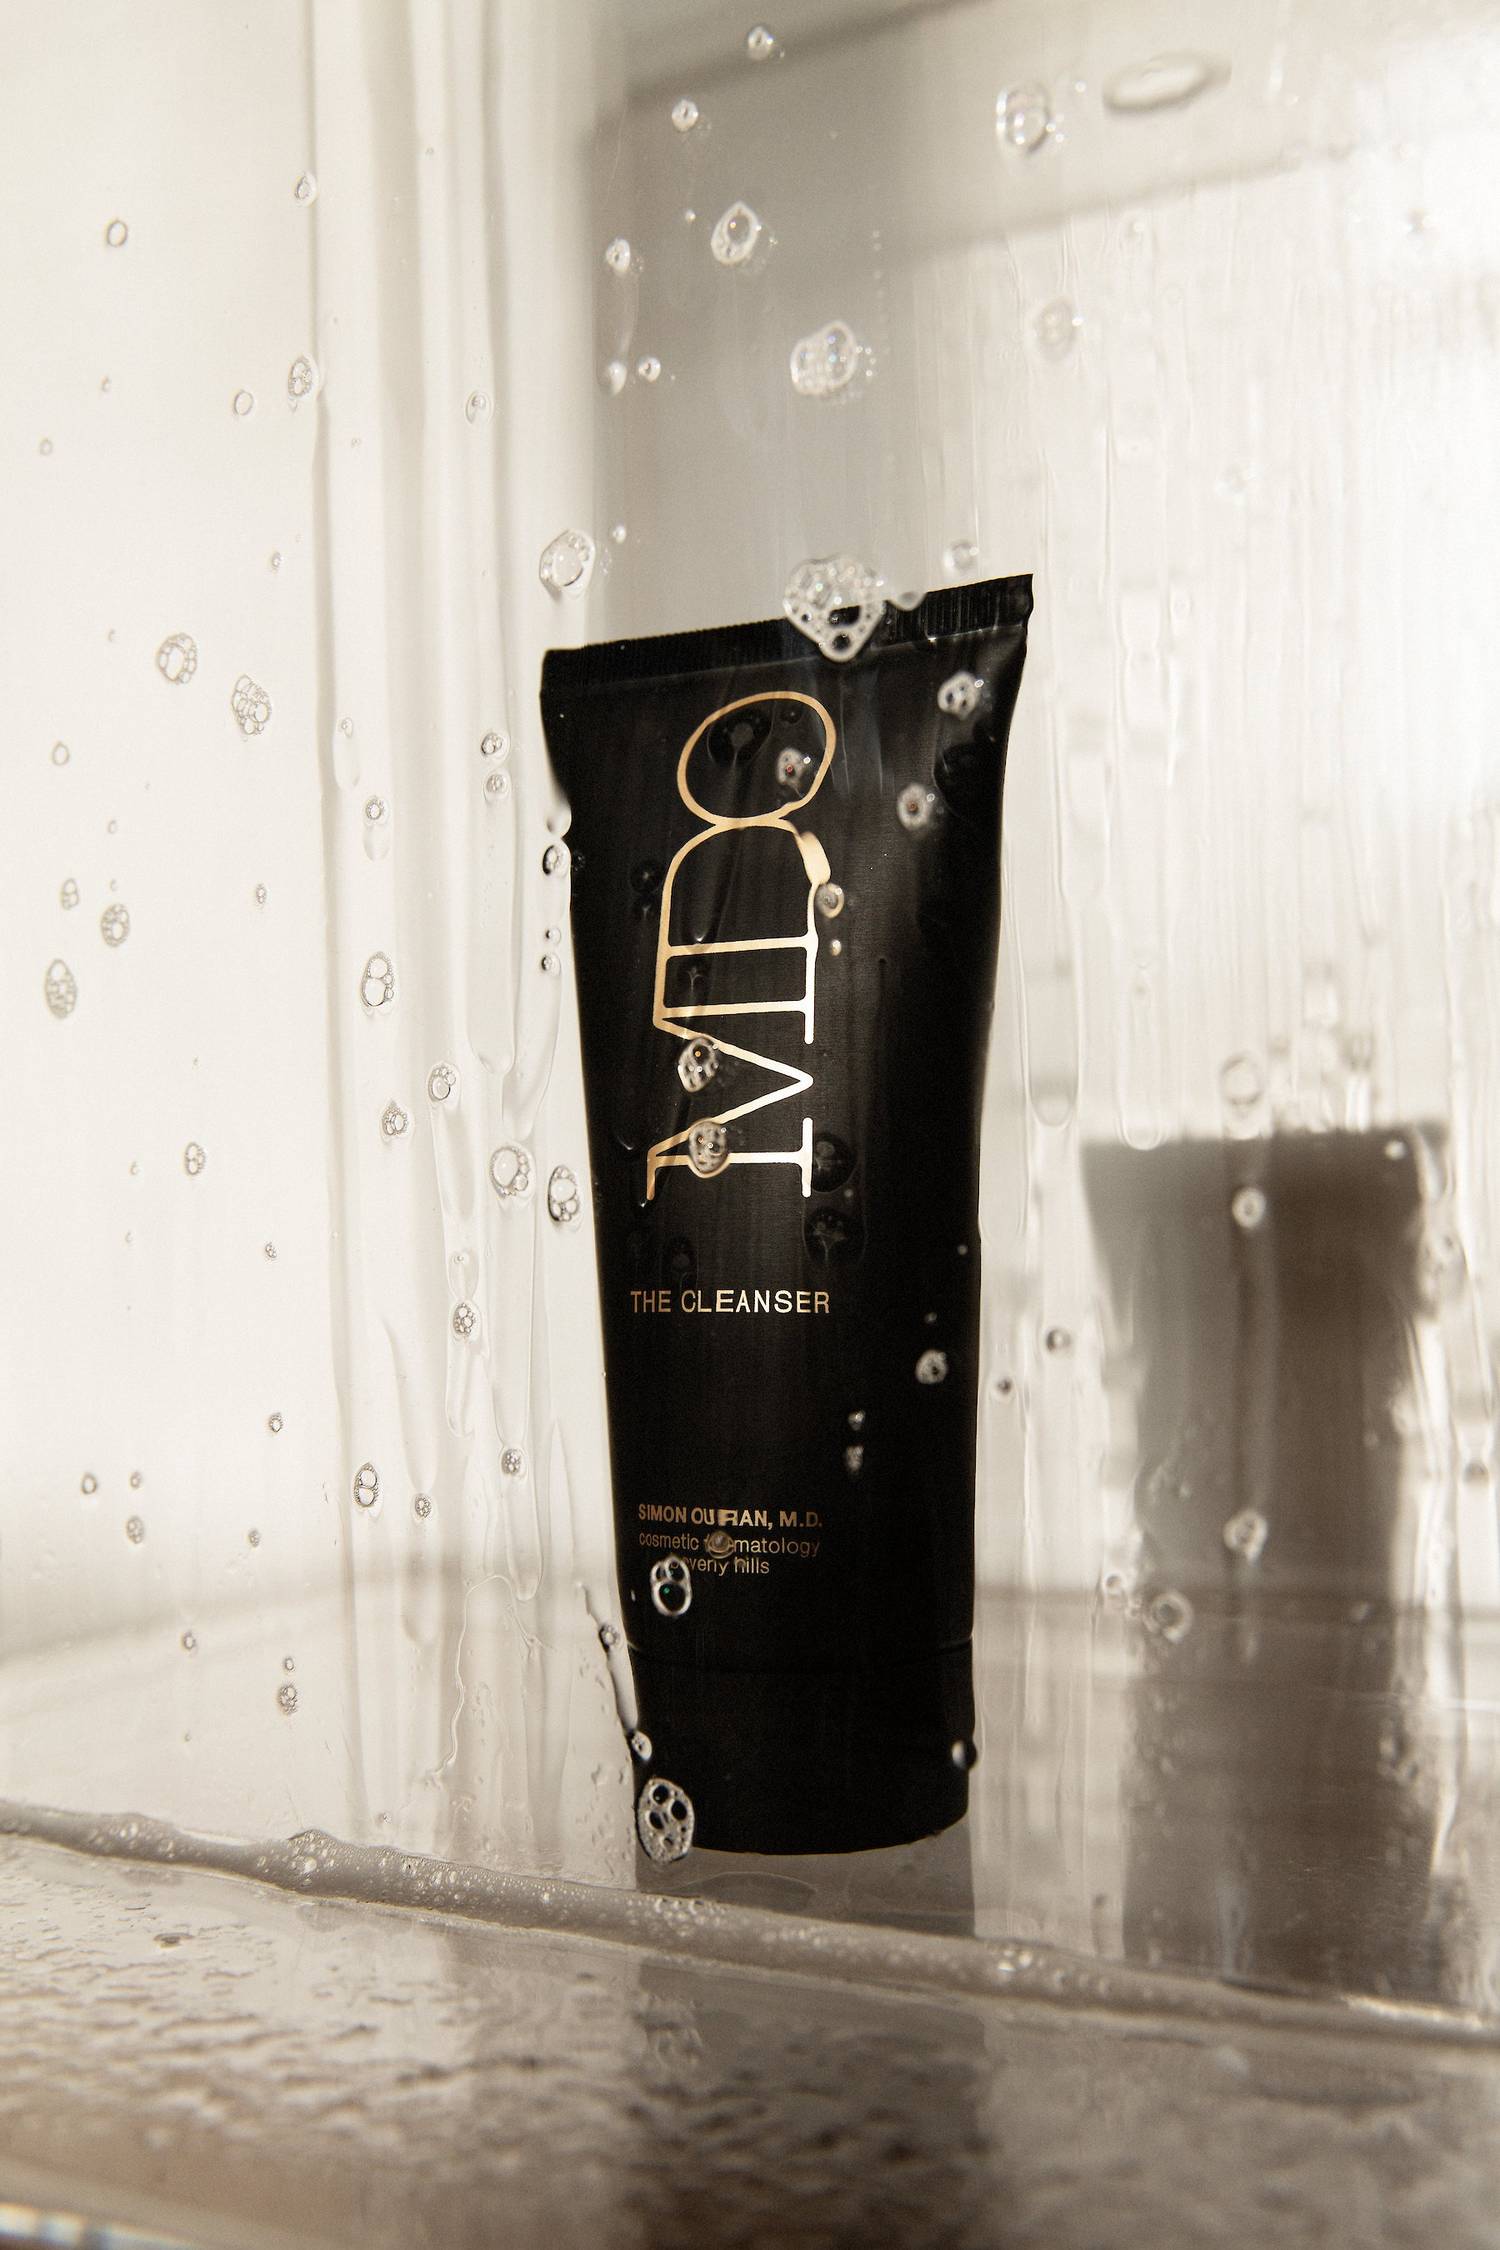 MDO Skincare The Cleanser